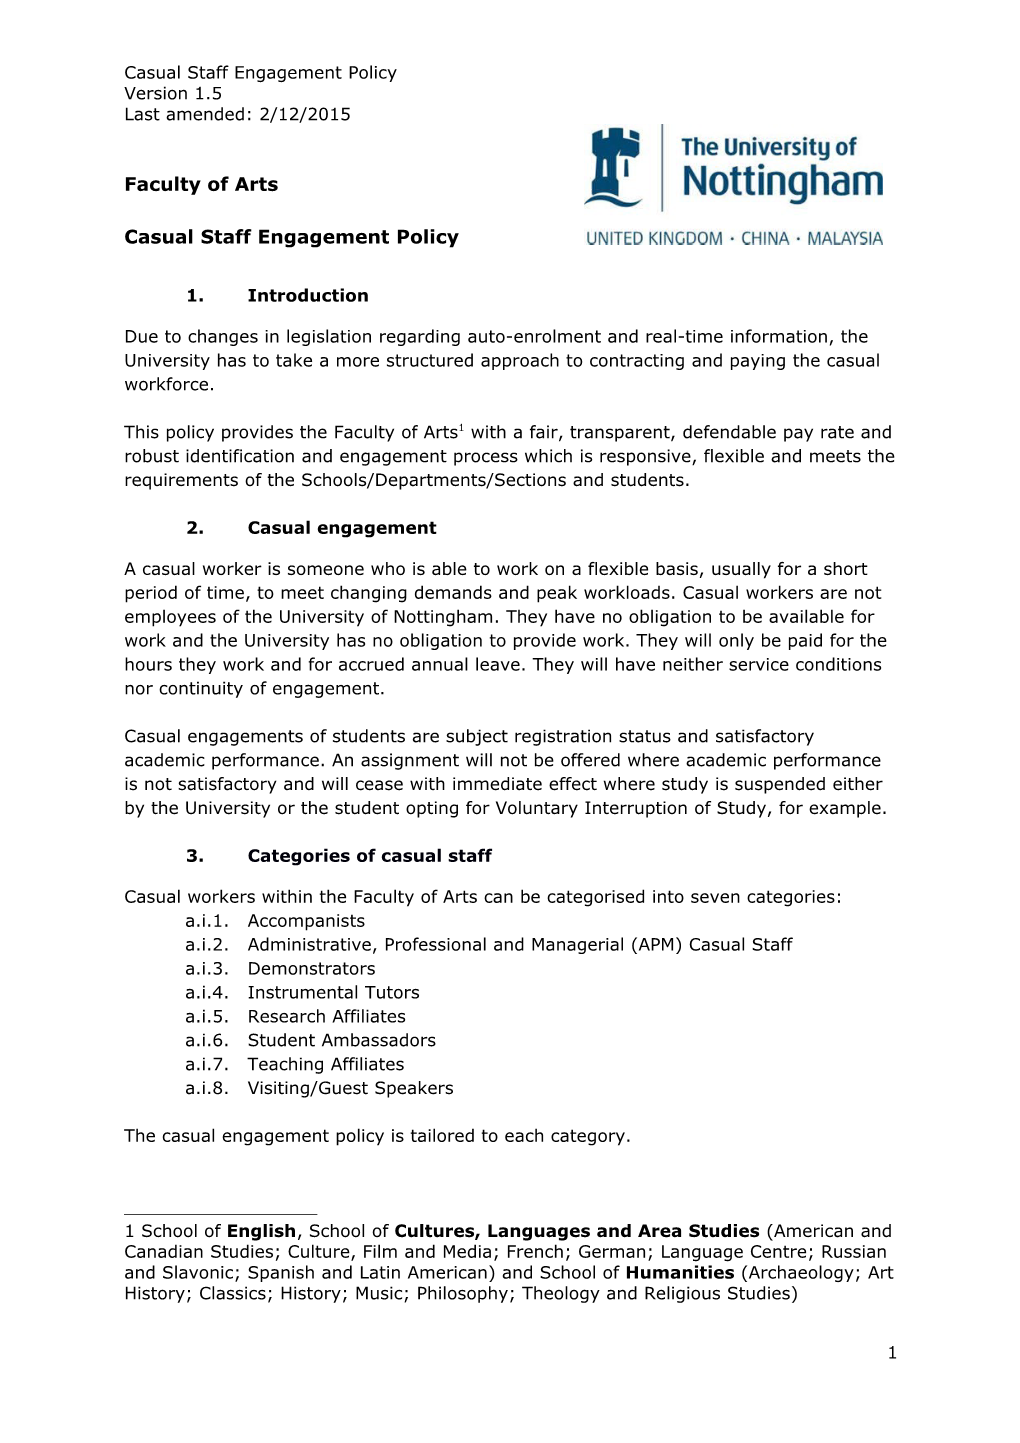 Casual Staff - Policy 2014-15 V1.0